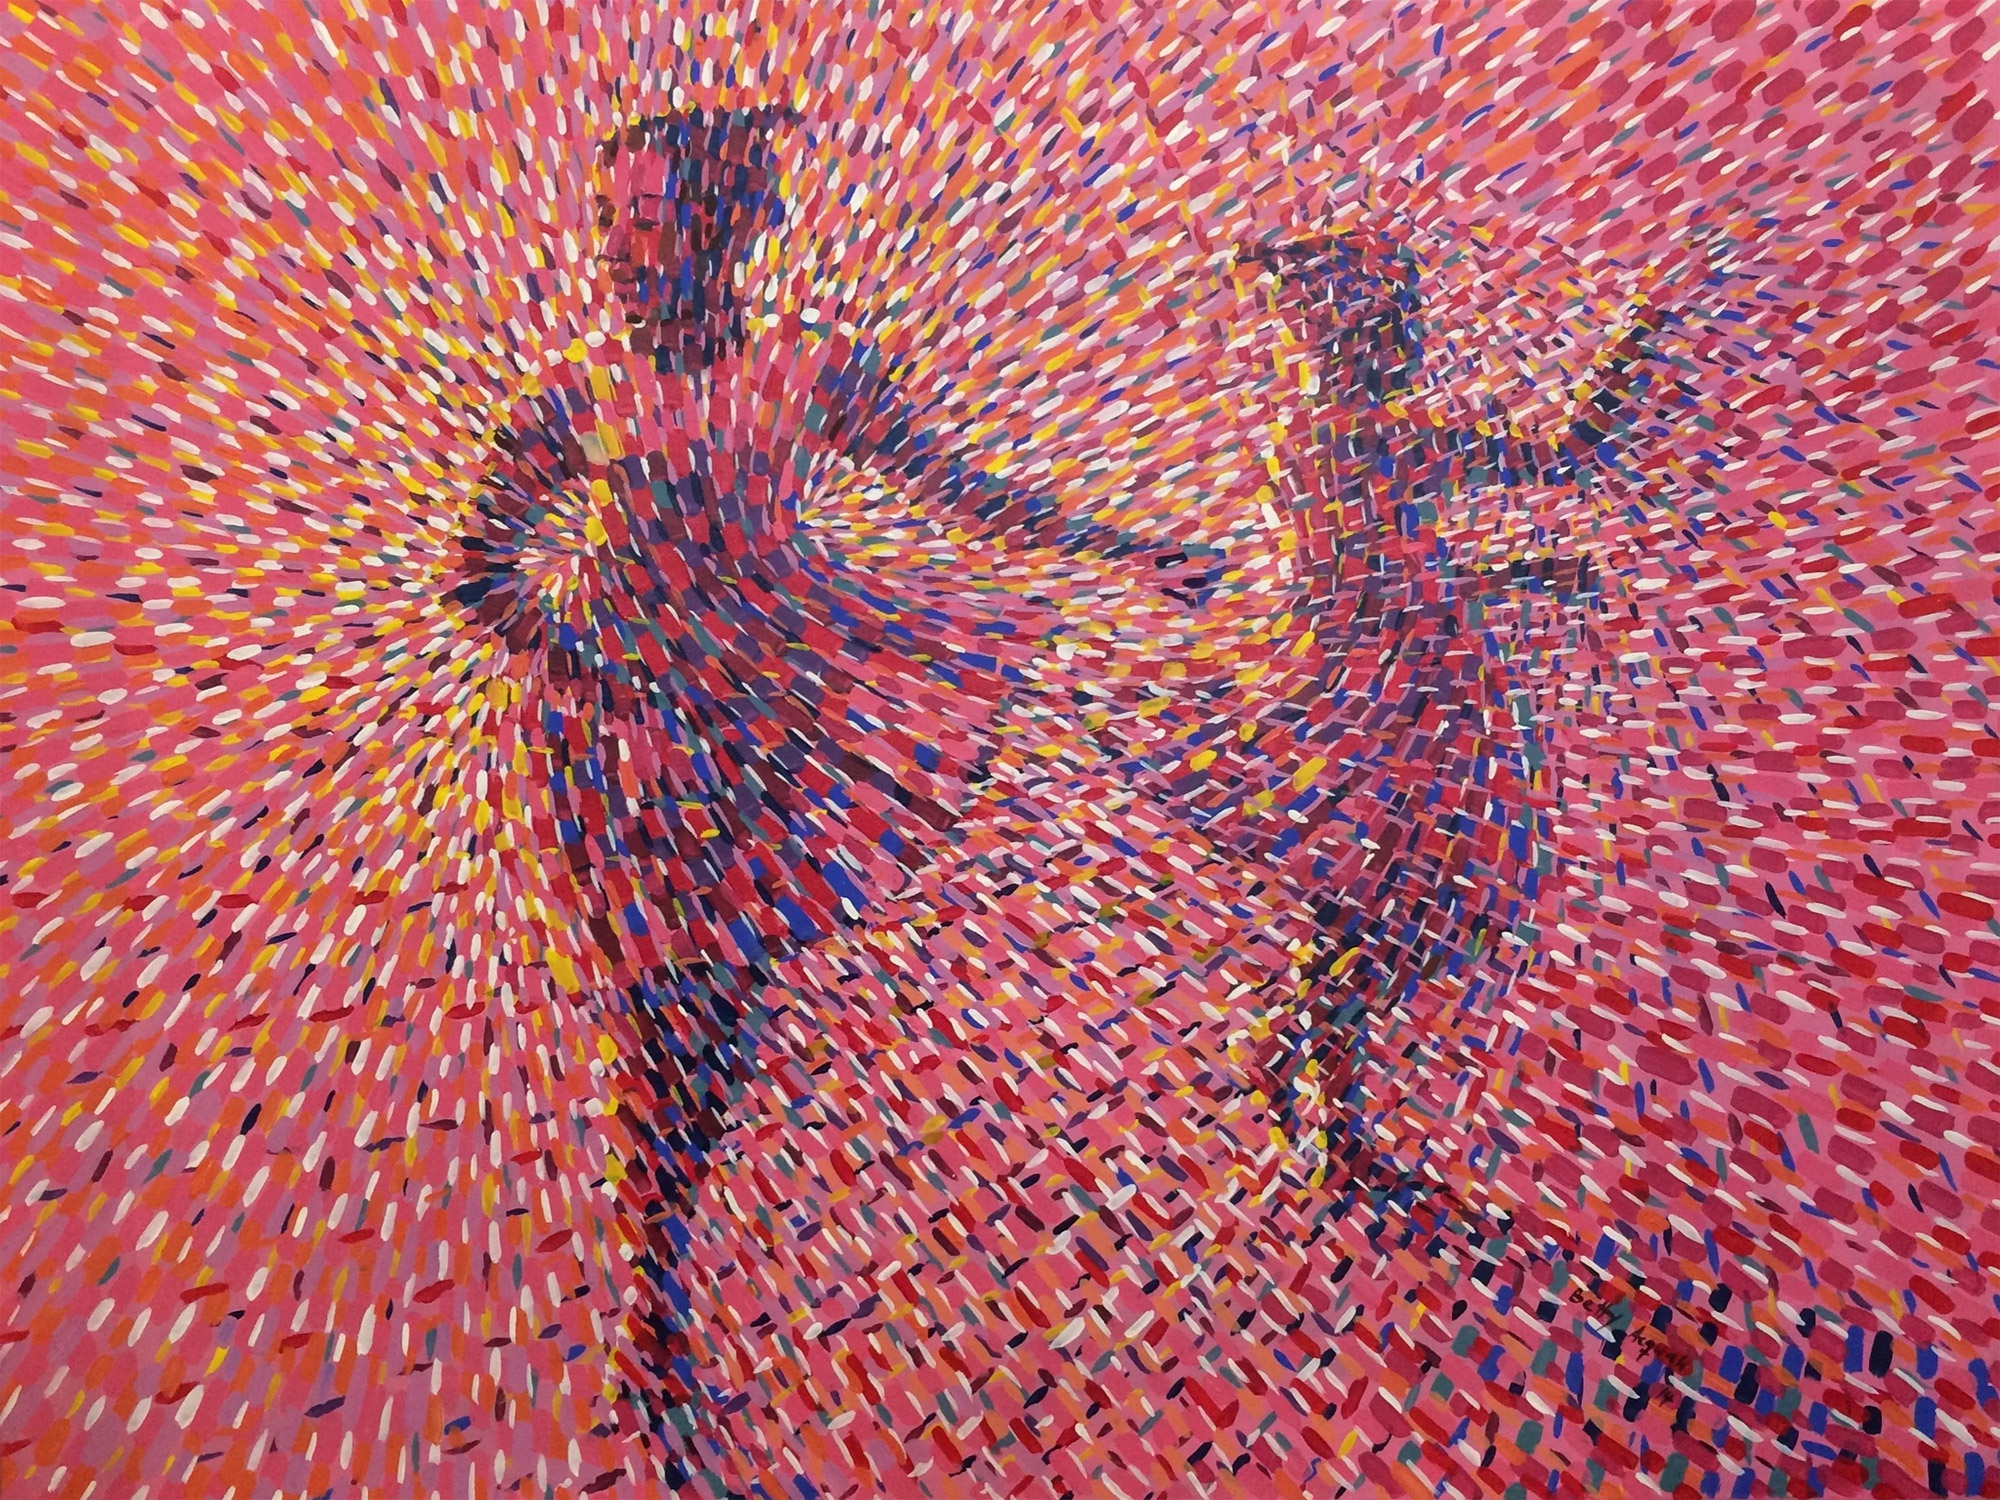 Innumerable Dots Cloak the Energetic Dancers in Betty Acquah’s Pointillistic Paintings